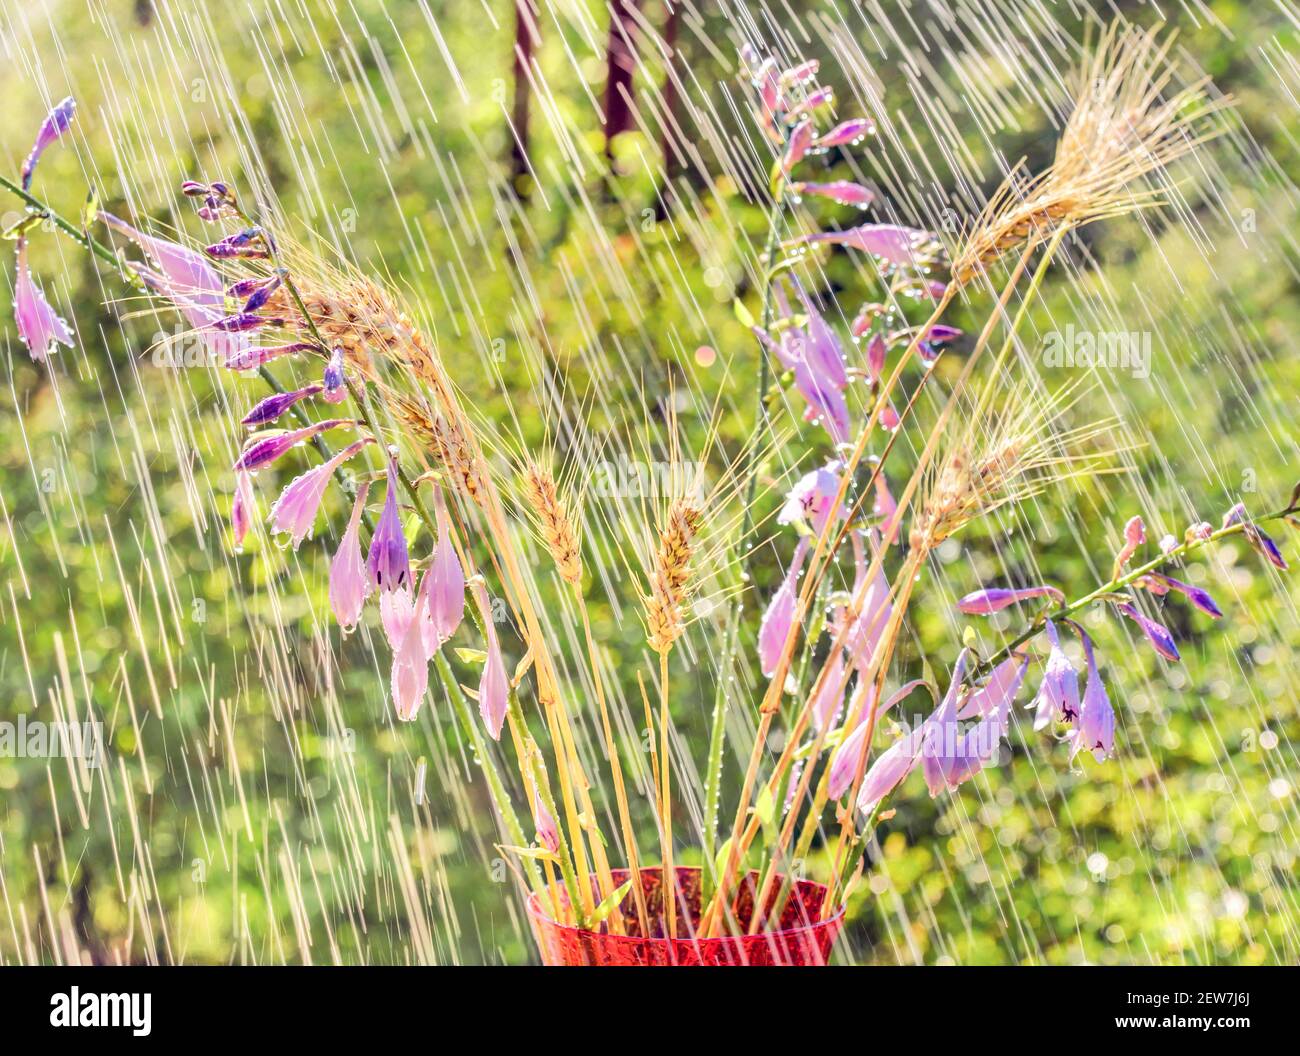 Hosta flowers and spikelets of wheat in the garden under the summer rain. Stock Photo